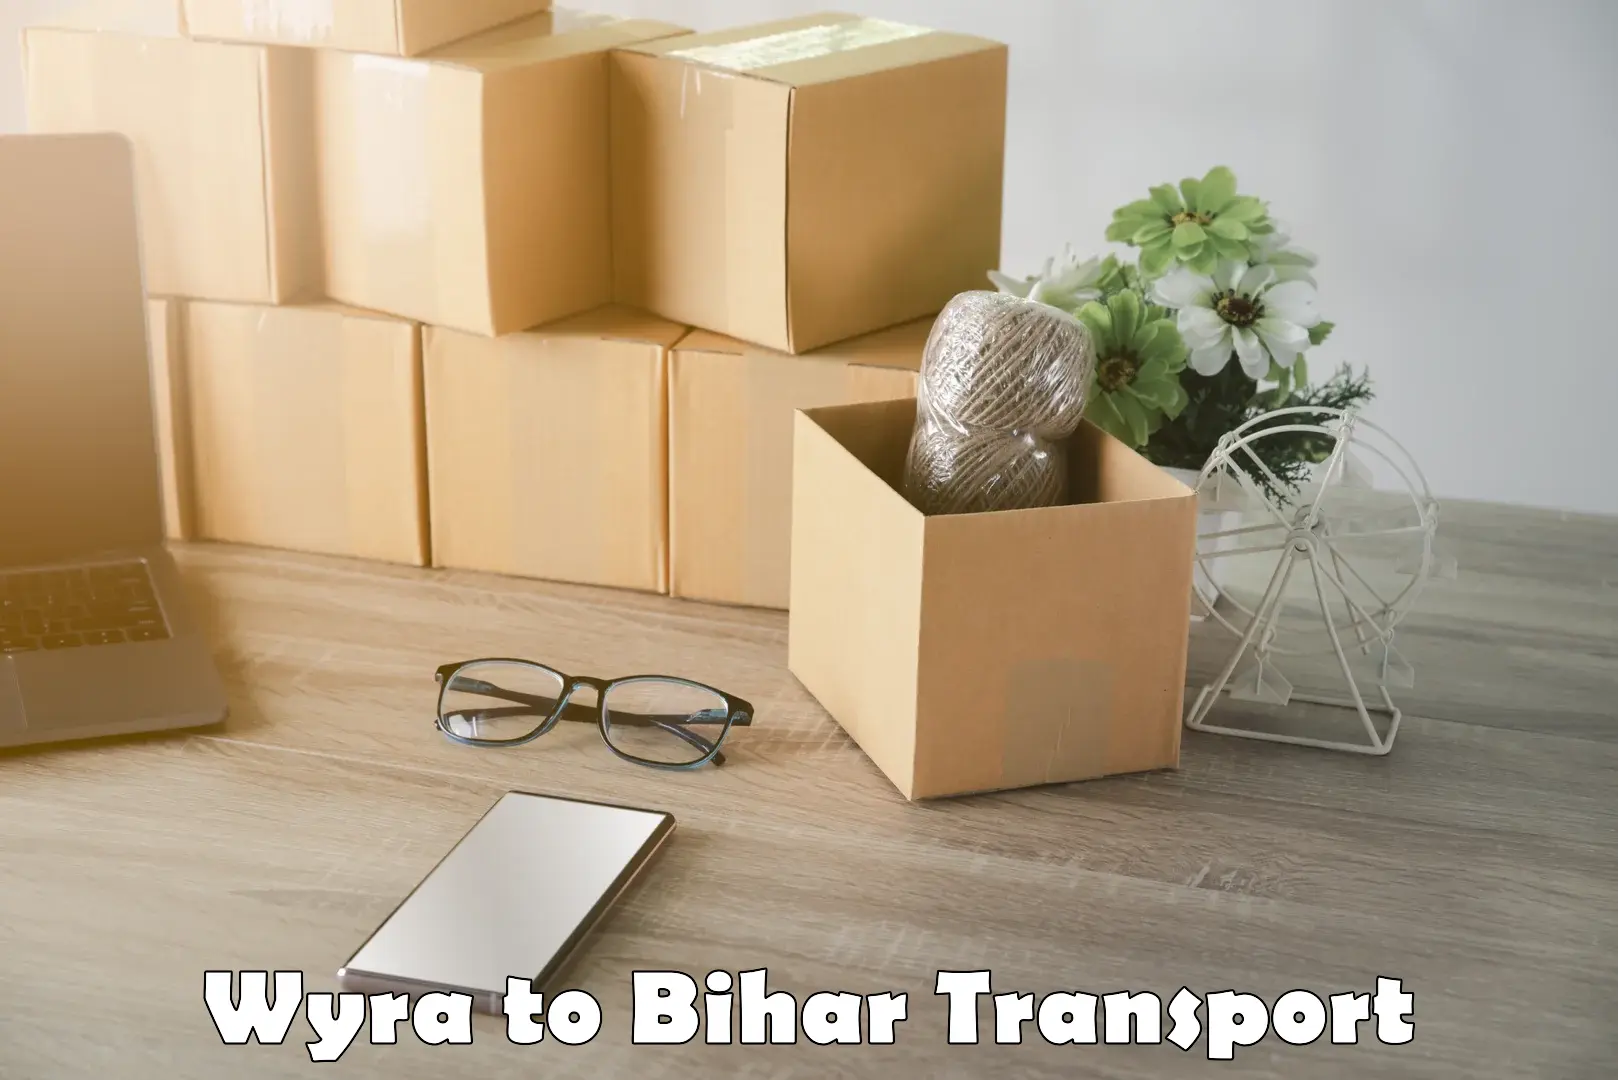 Transport in sharing Wyra to Sandesh